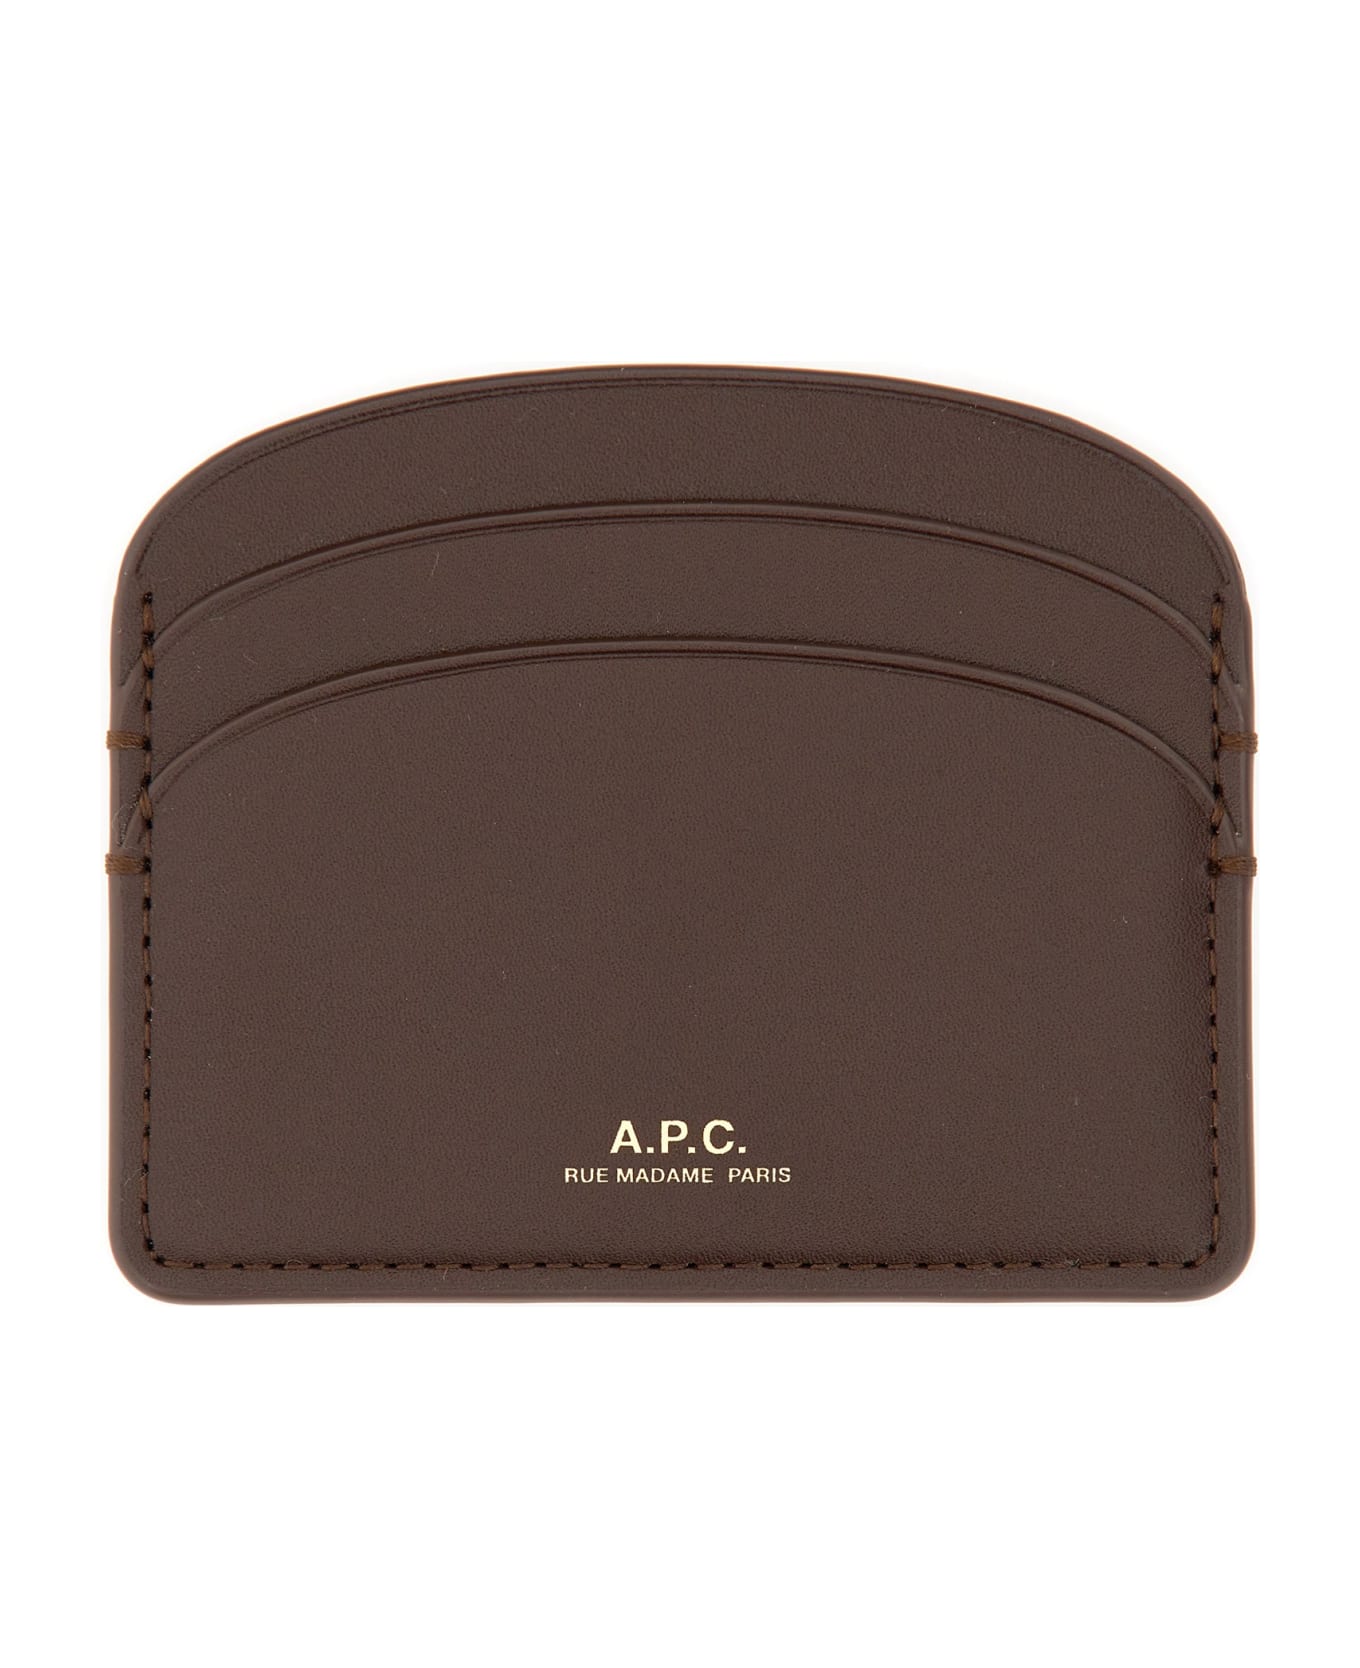 A.P.C. Demi Lune Leather Card Holder - brown 財布